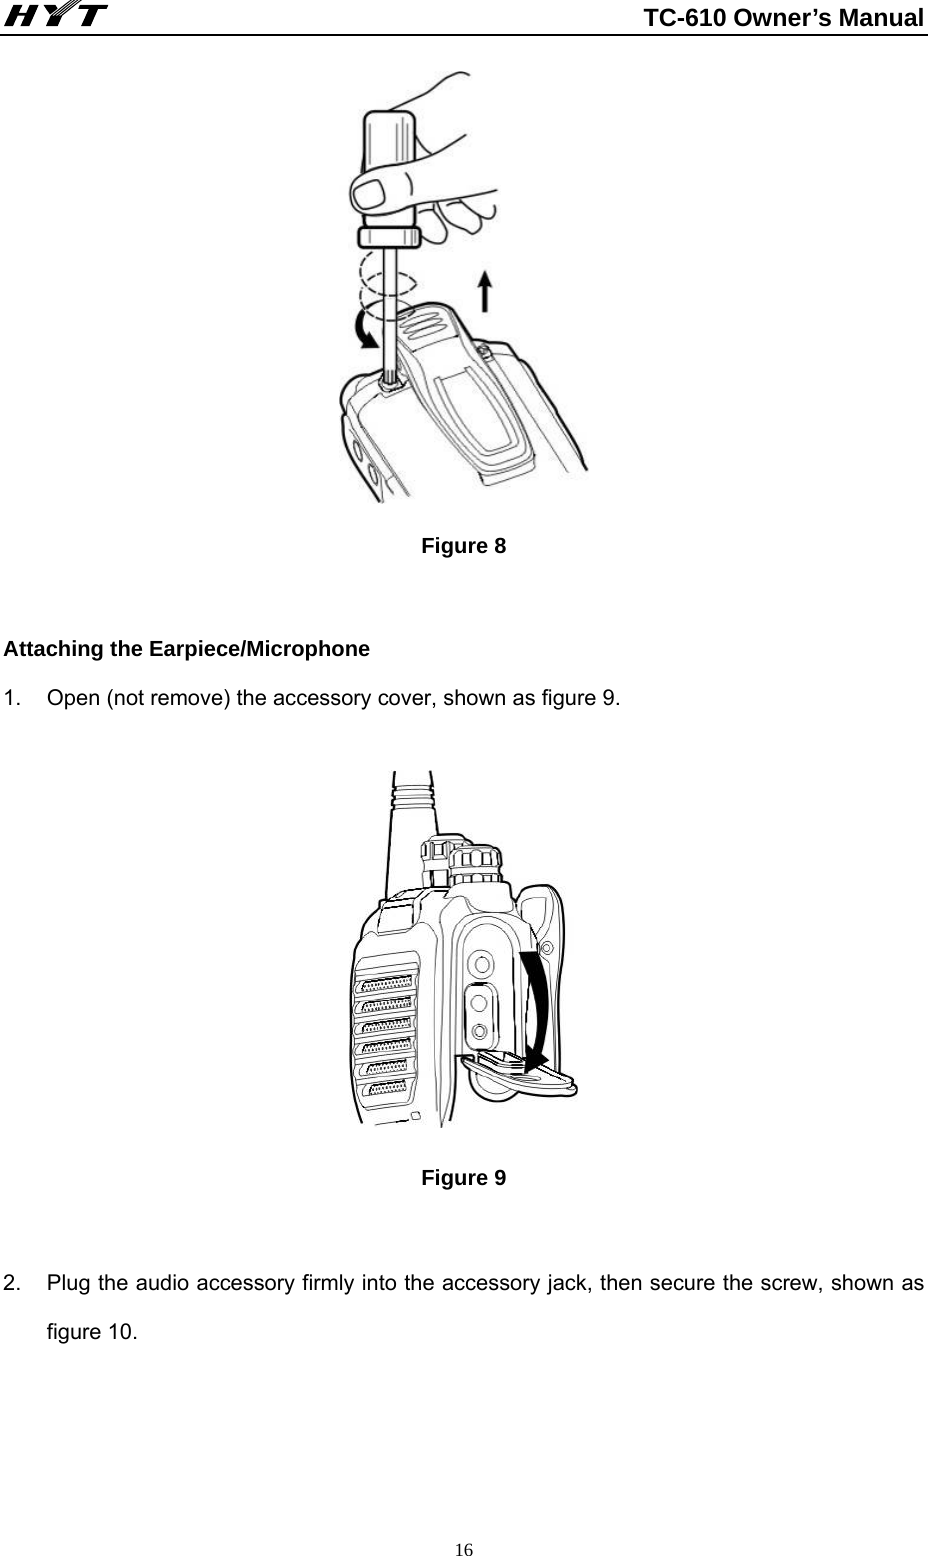                                                          TC-610 Owner’s Manual  16 Figure 8  Attaching the Earpiece/Microphone     1.  Open (not remove) the accessory cover, shown as figure 9.      Figure 9   2.  Plug the audio accessory firmly into the accessory jack, then secure the screw, shown as figure 10.     